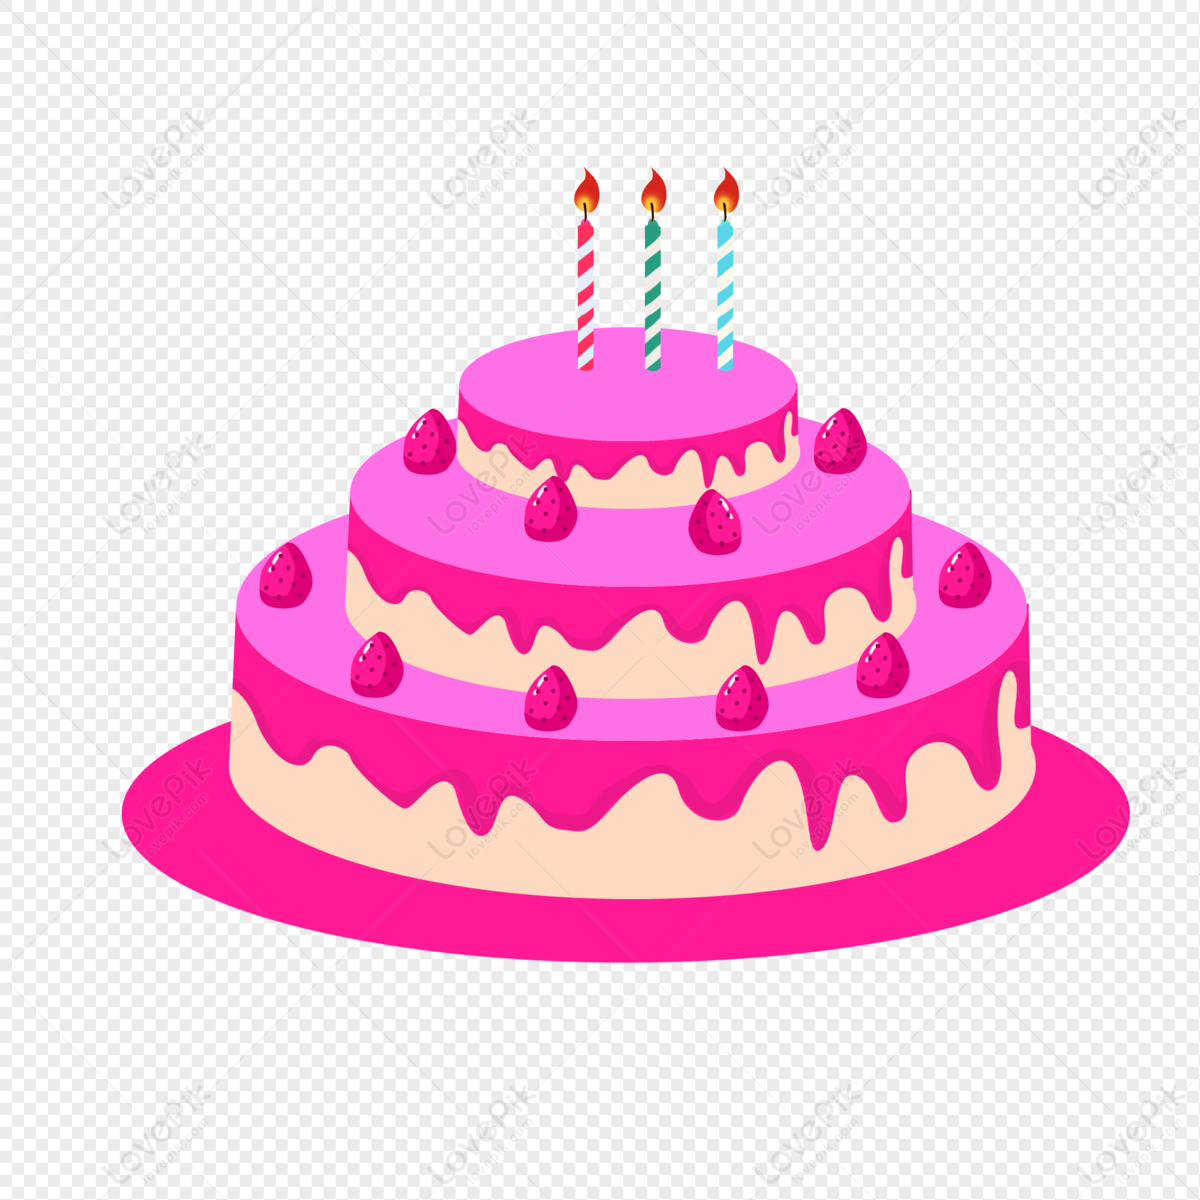 Download Birthday Cake Clipart HQ PNG Image | FreePNGImg